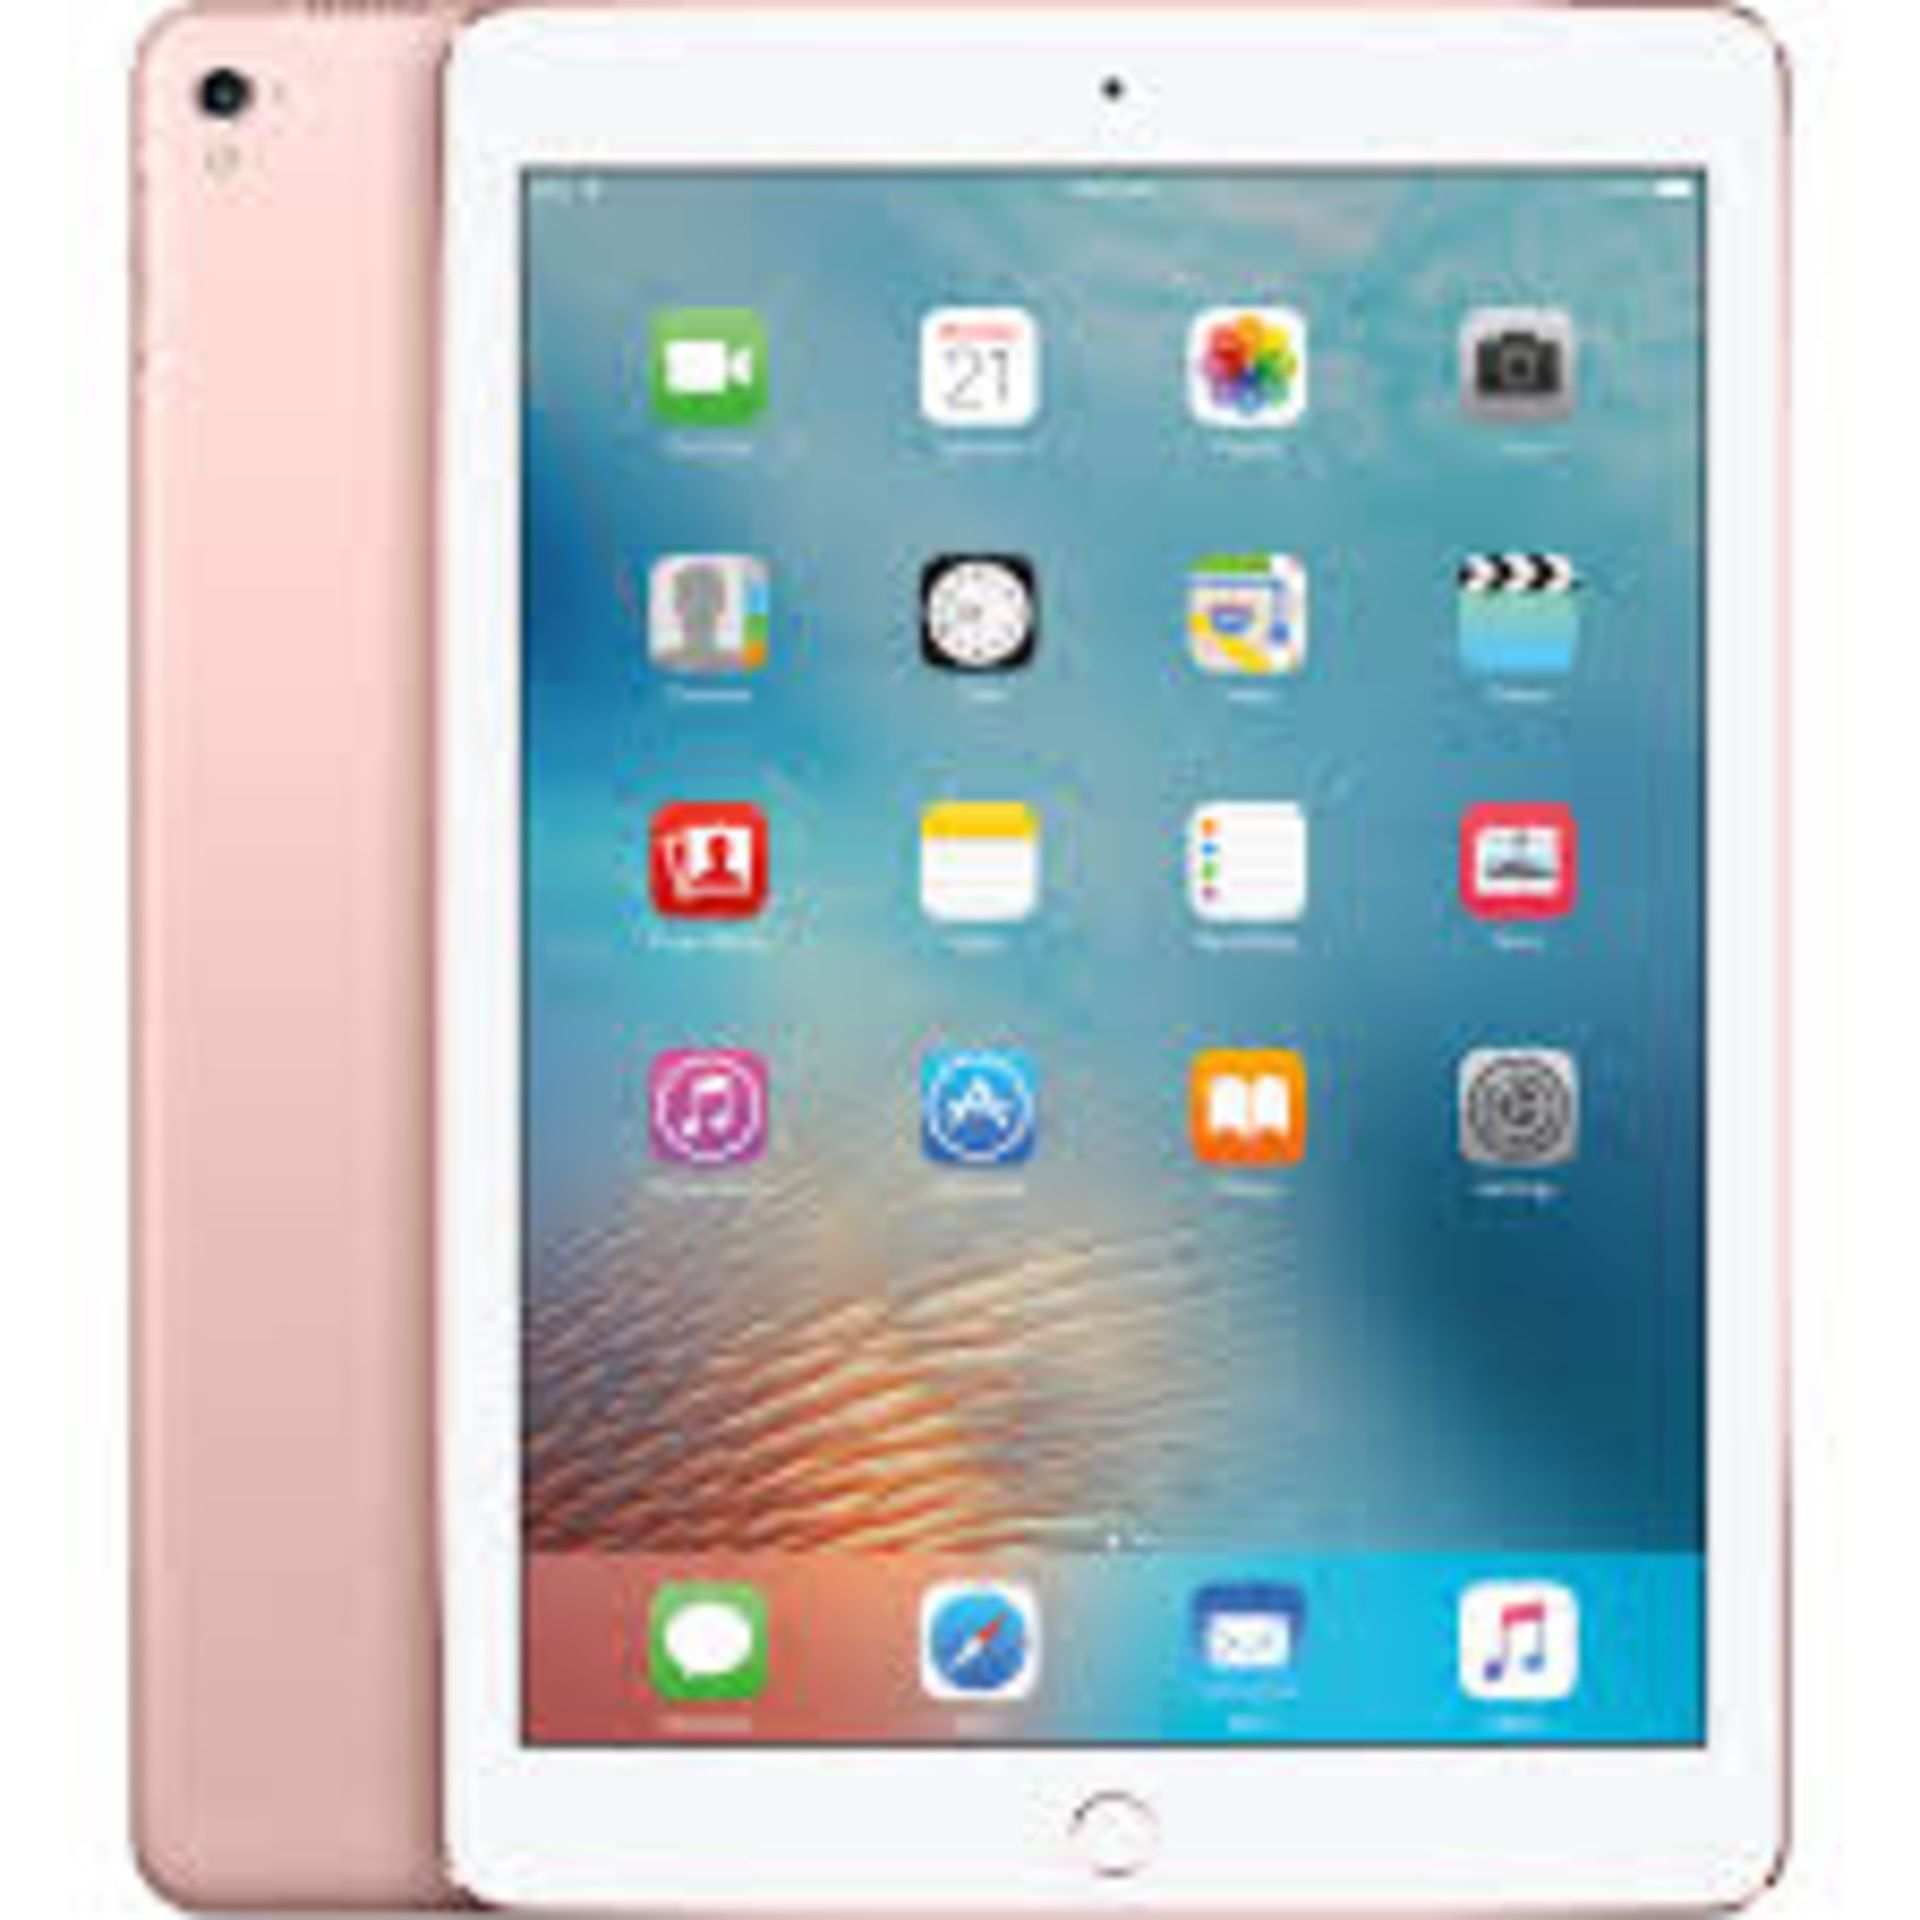 V Grade B Apple iPad Pro 9.7 - Rose Gold - 32GB - Wi-Fi Only - with Cable and Charger - May not have